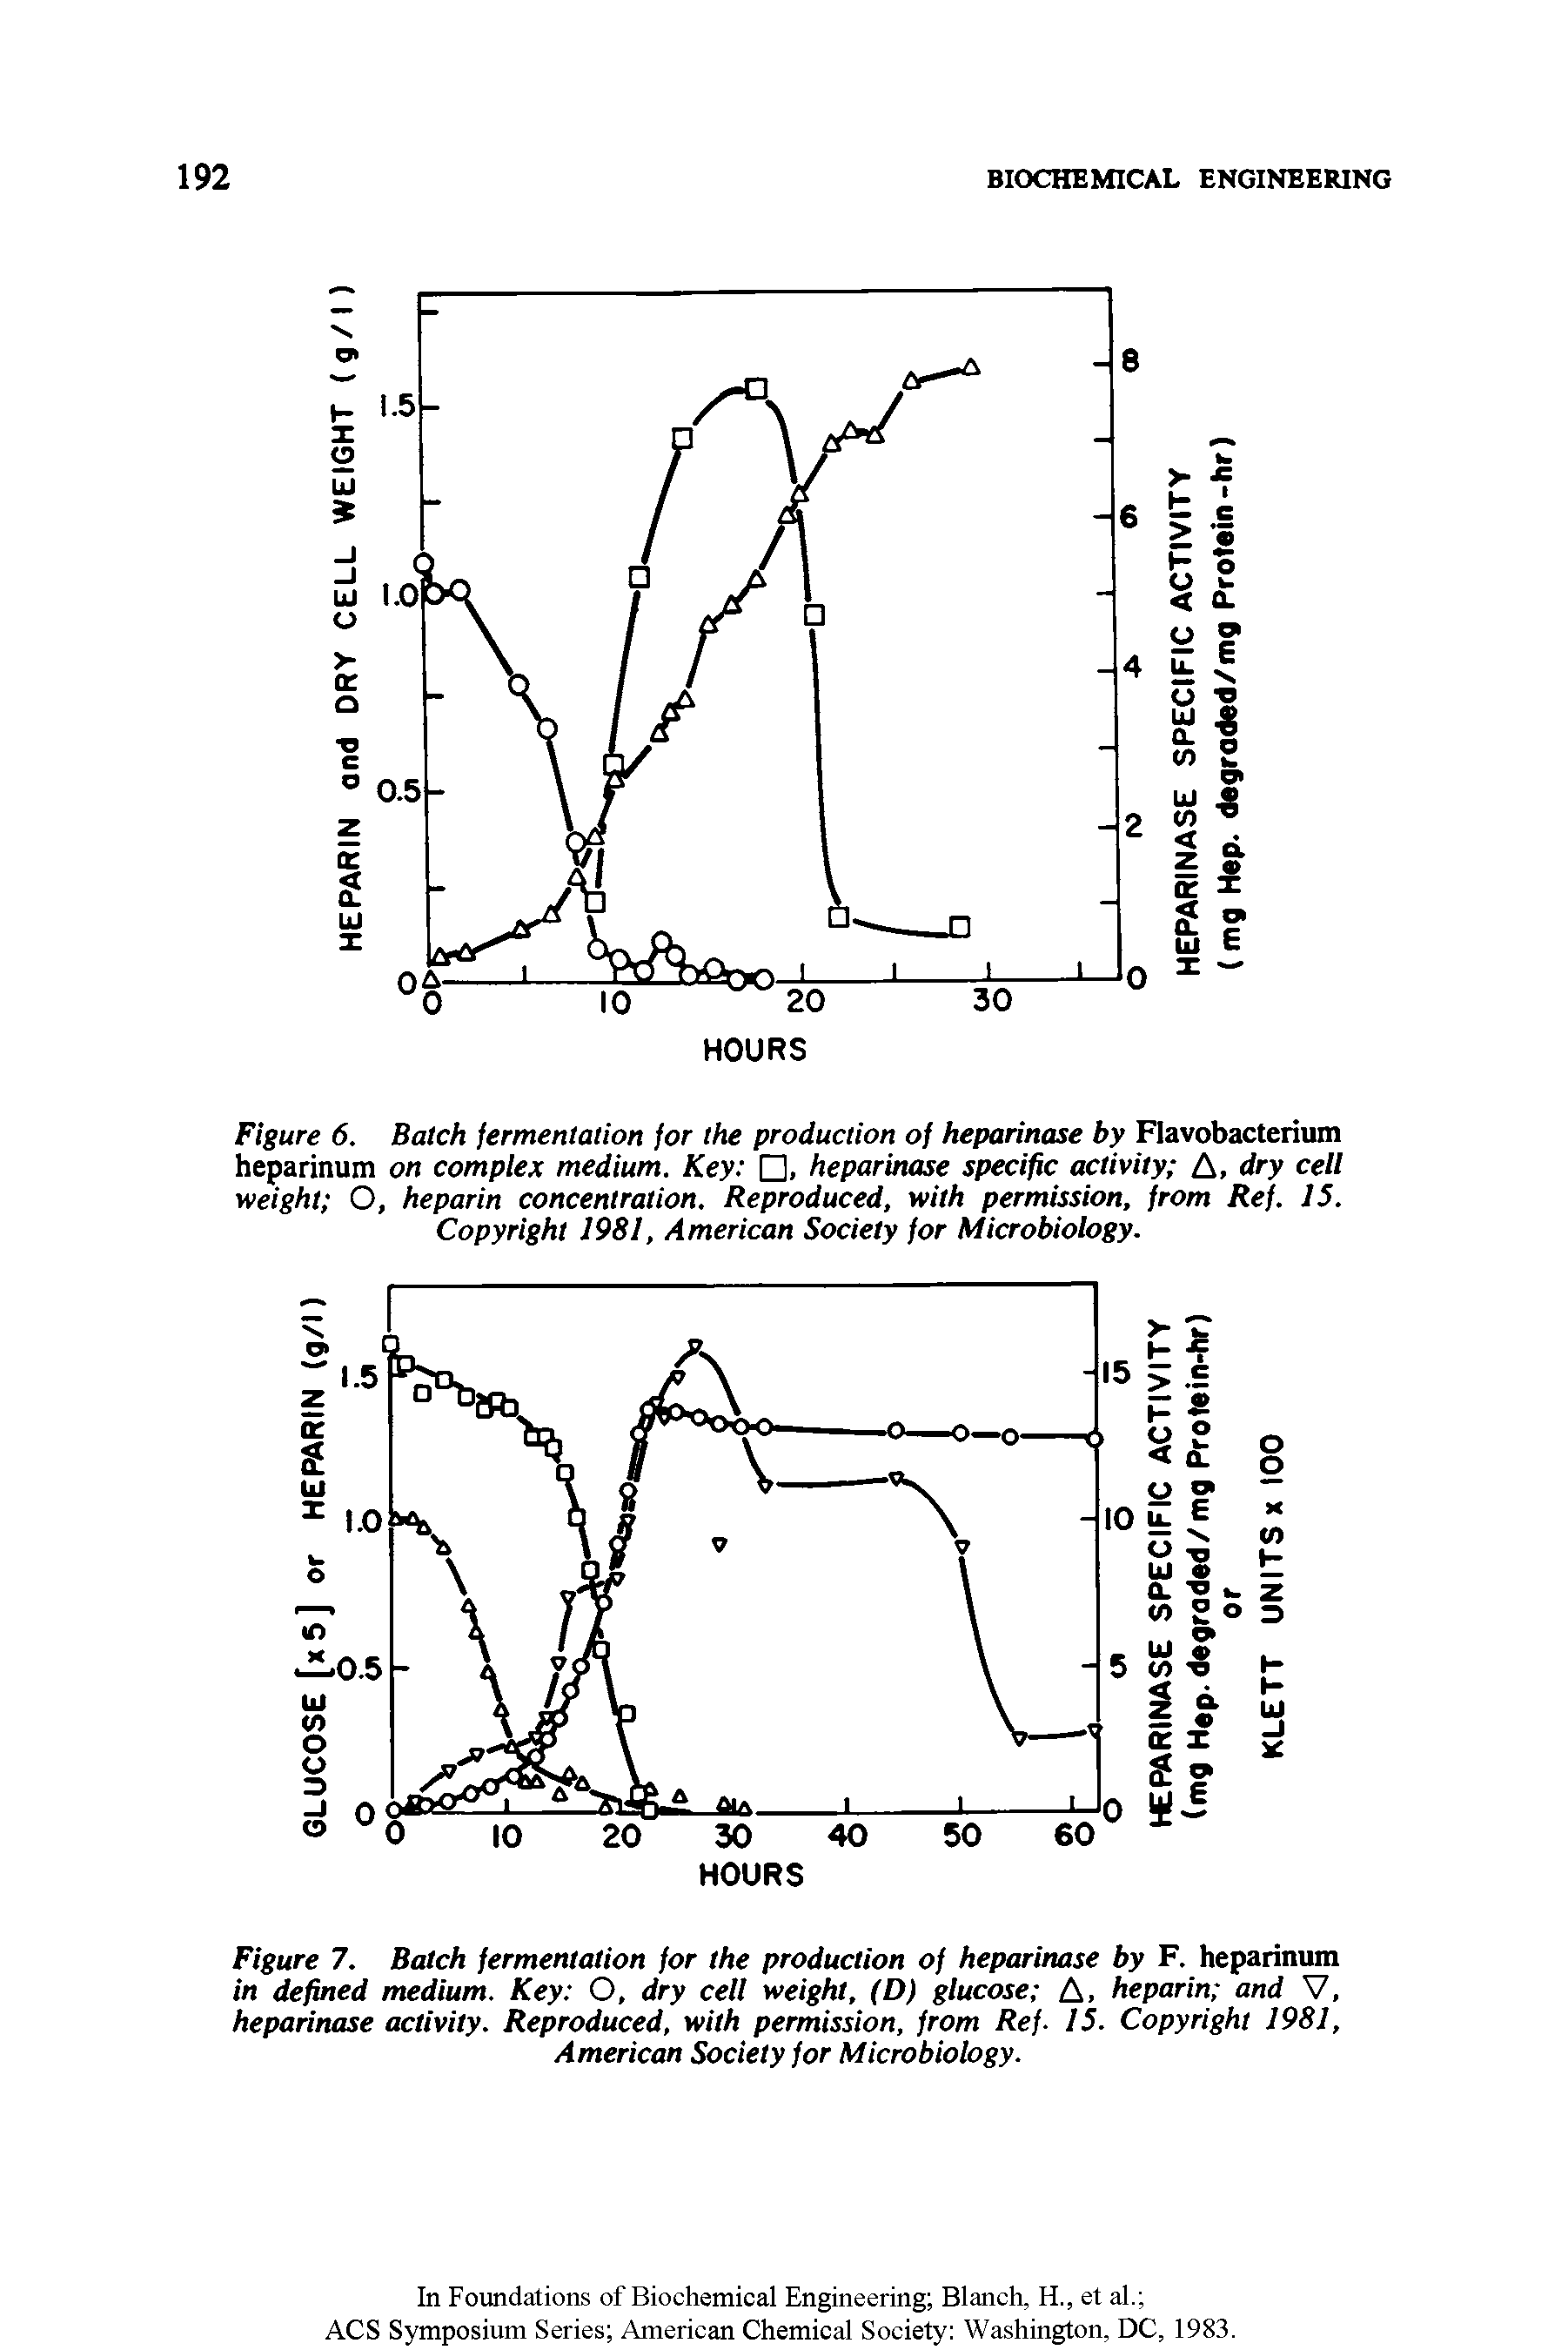 Figure 6. Batch fermentation for the production of heparinase by Flavobacterium heparinum on compiex medium. Key , heparinase specific activity A, dry cell weight O, heparin concentration. Reproduced, with permission, from Ref. 15. Copyright 1981, American Society for Microbiology.